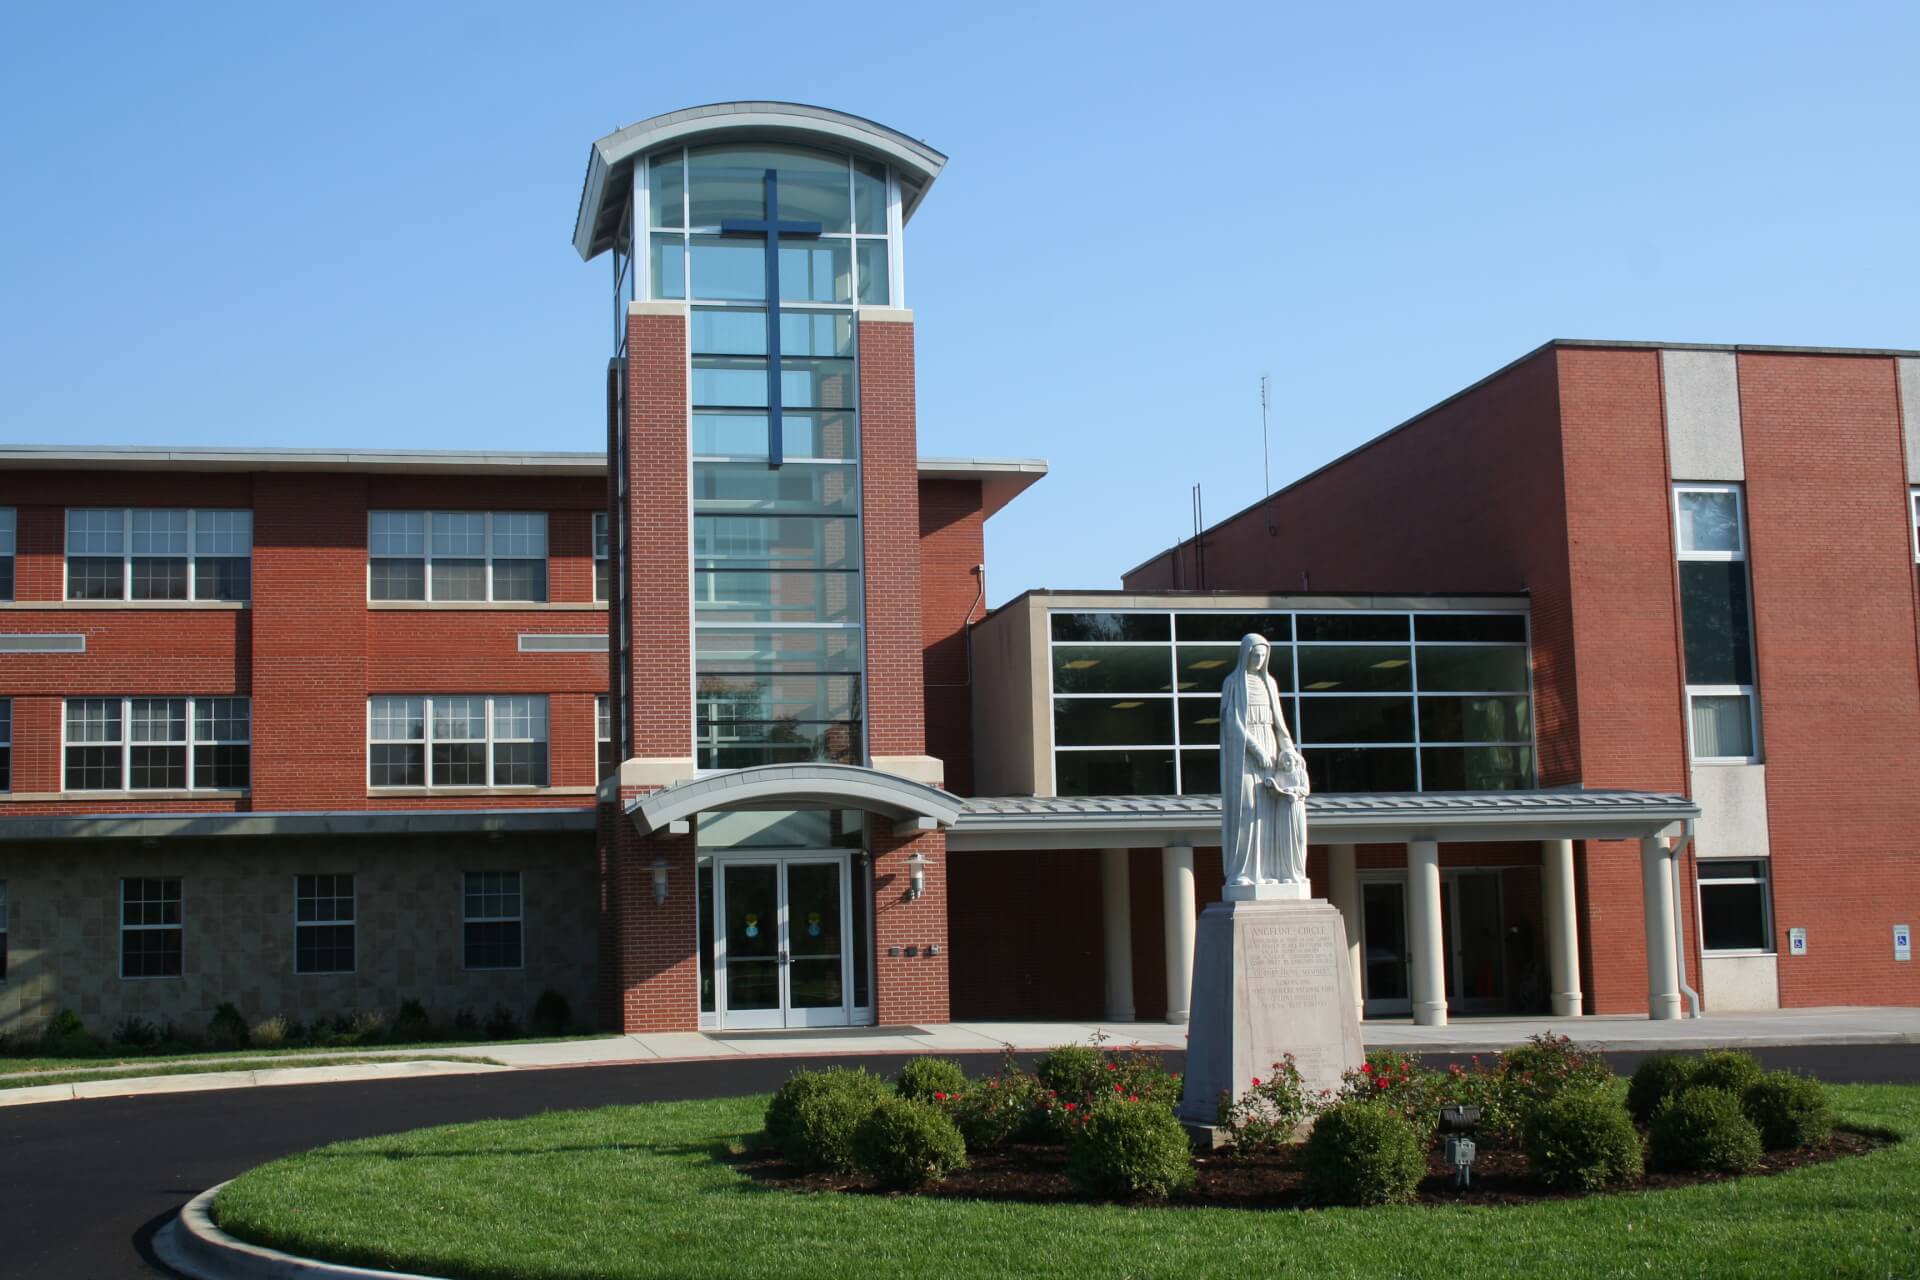 SacredHeartAcademy Catholic Schools in the Archdiocese of Louisville